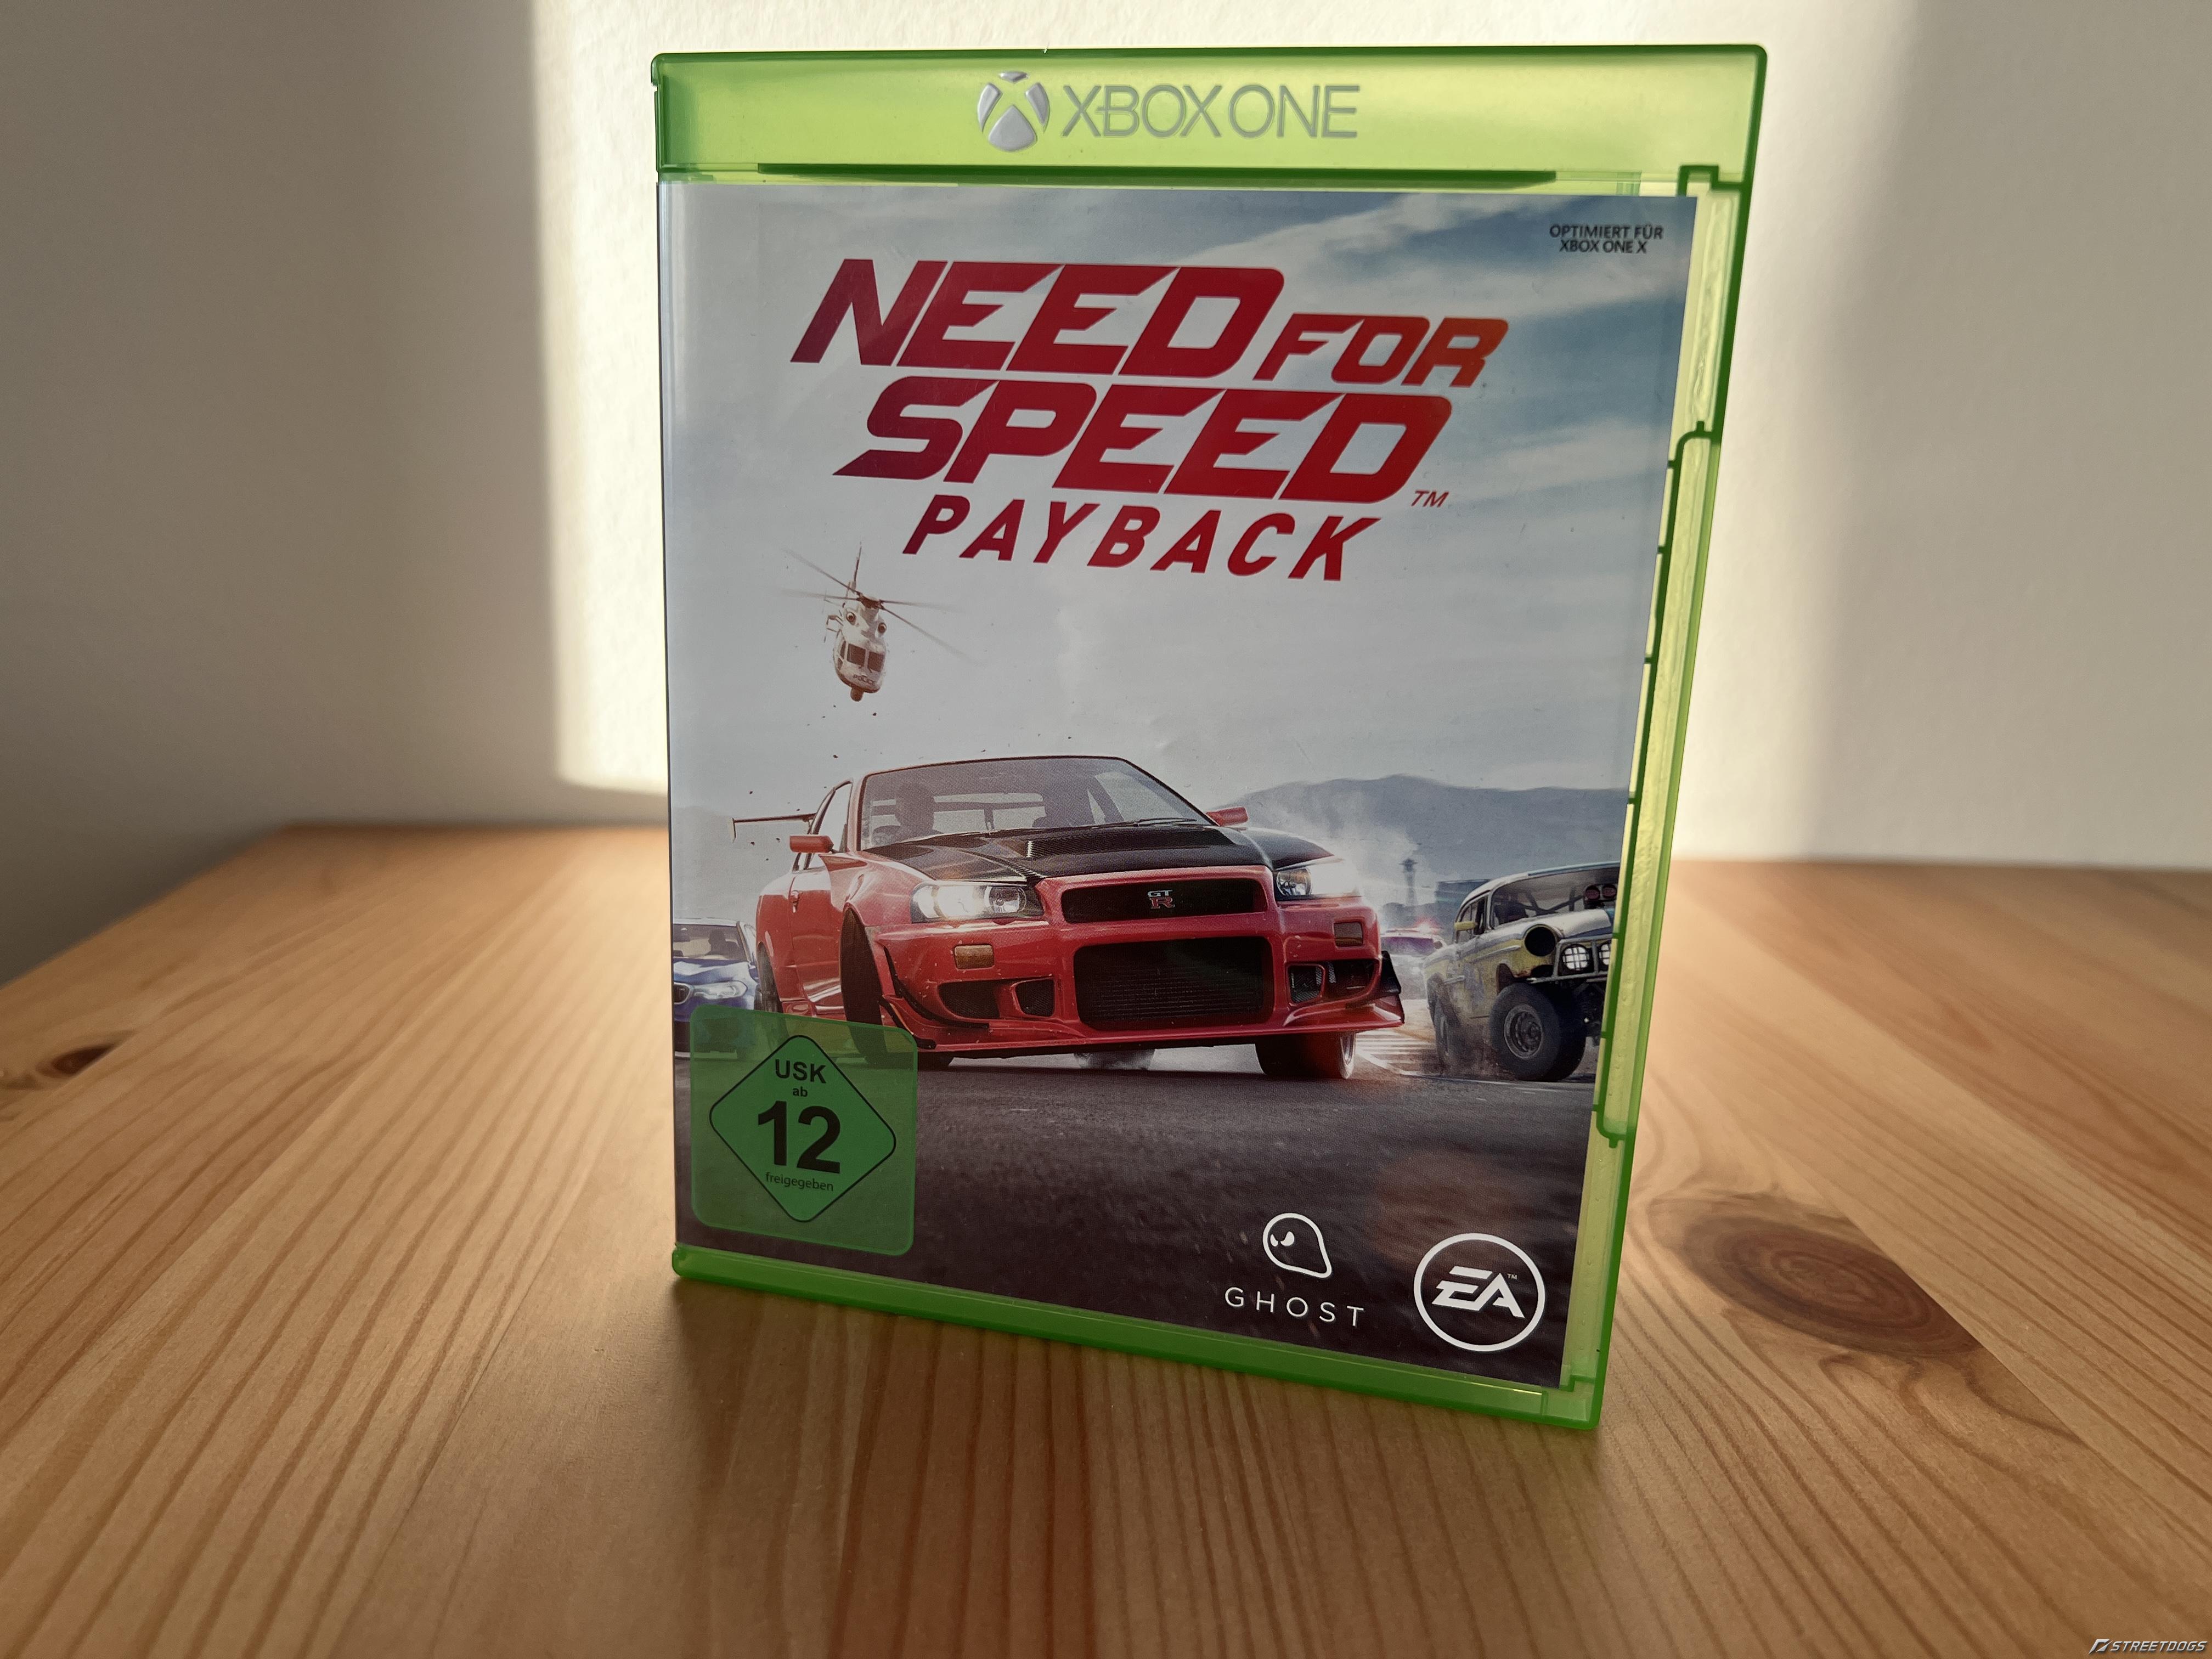 Throwback Thursday: Need for Speed: Payback